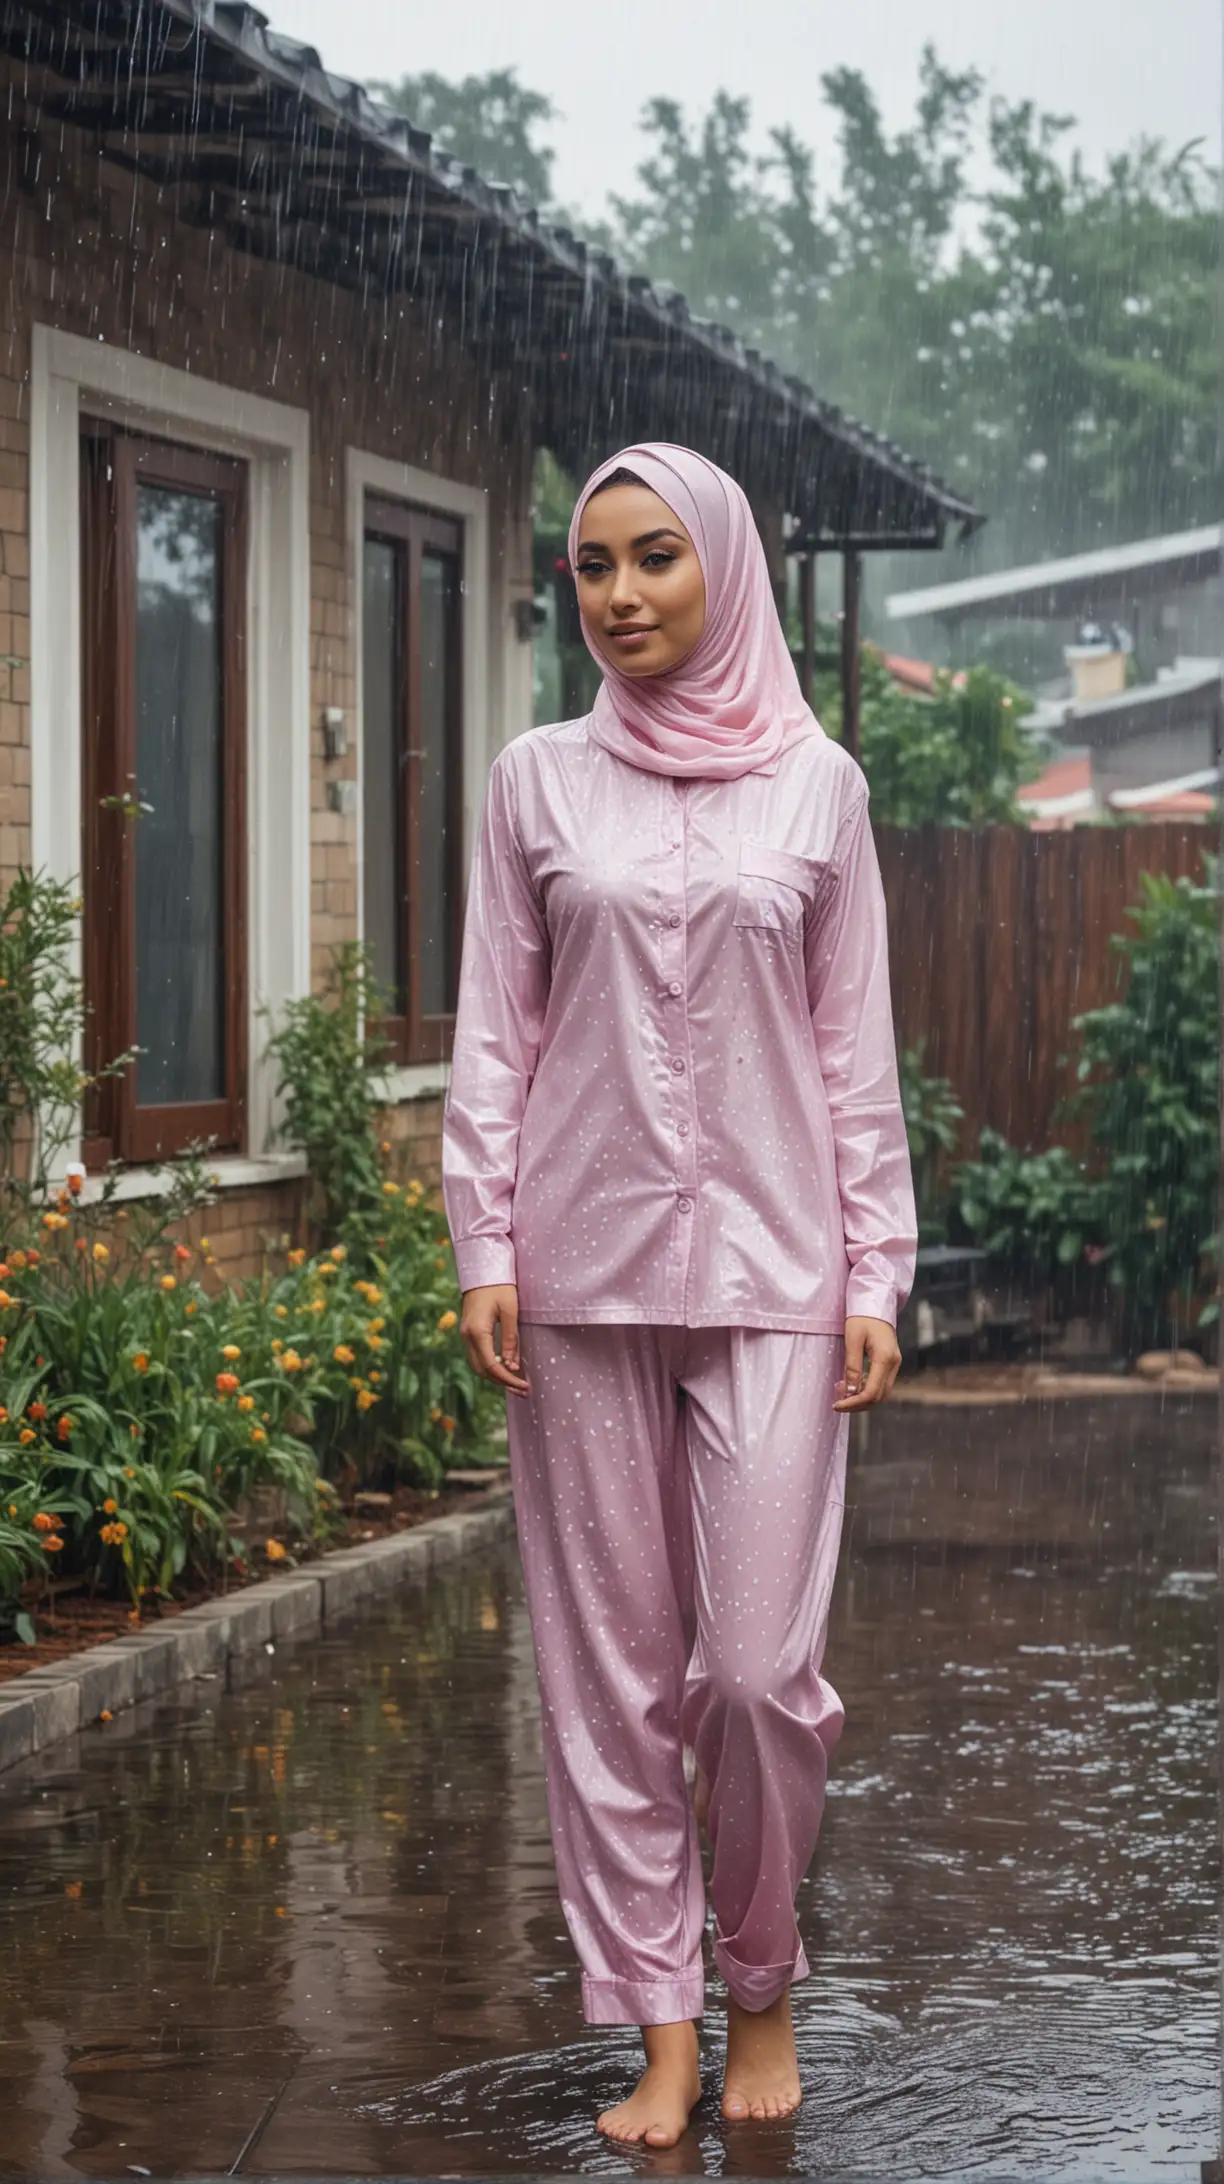 Sensual Woman in Wet Pajamas Standing in Drizzling Yard